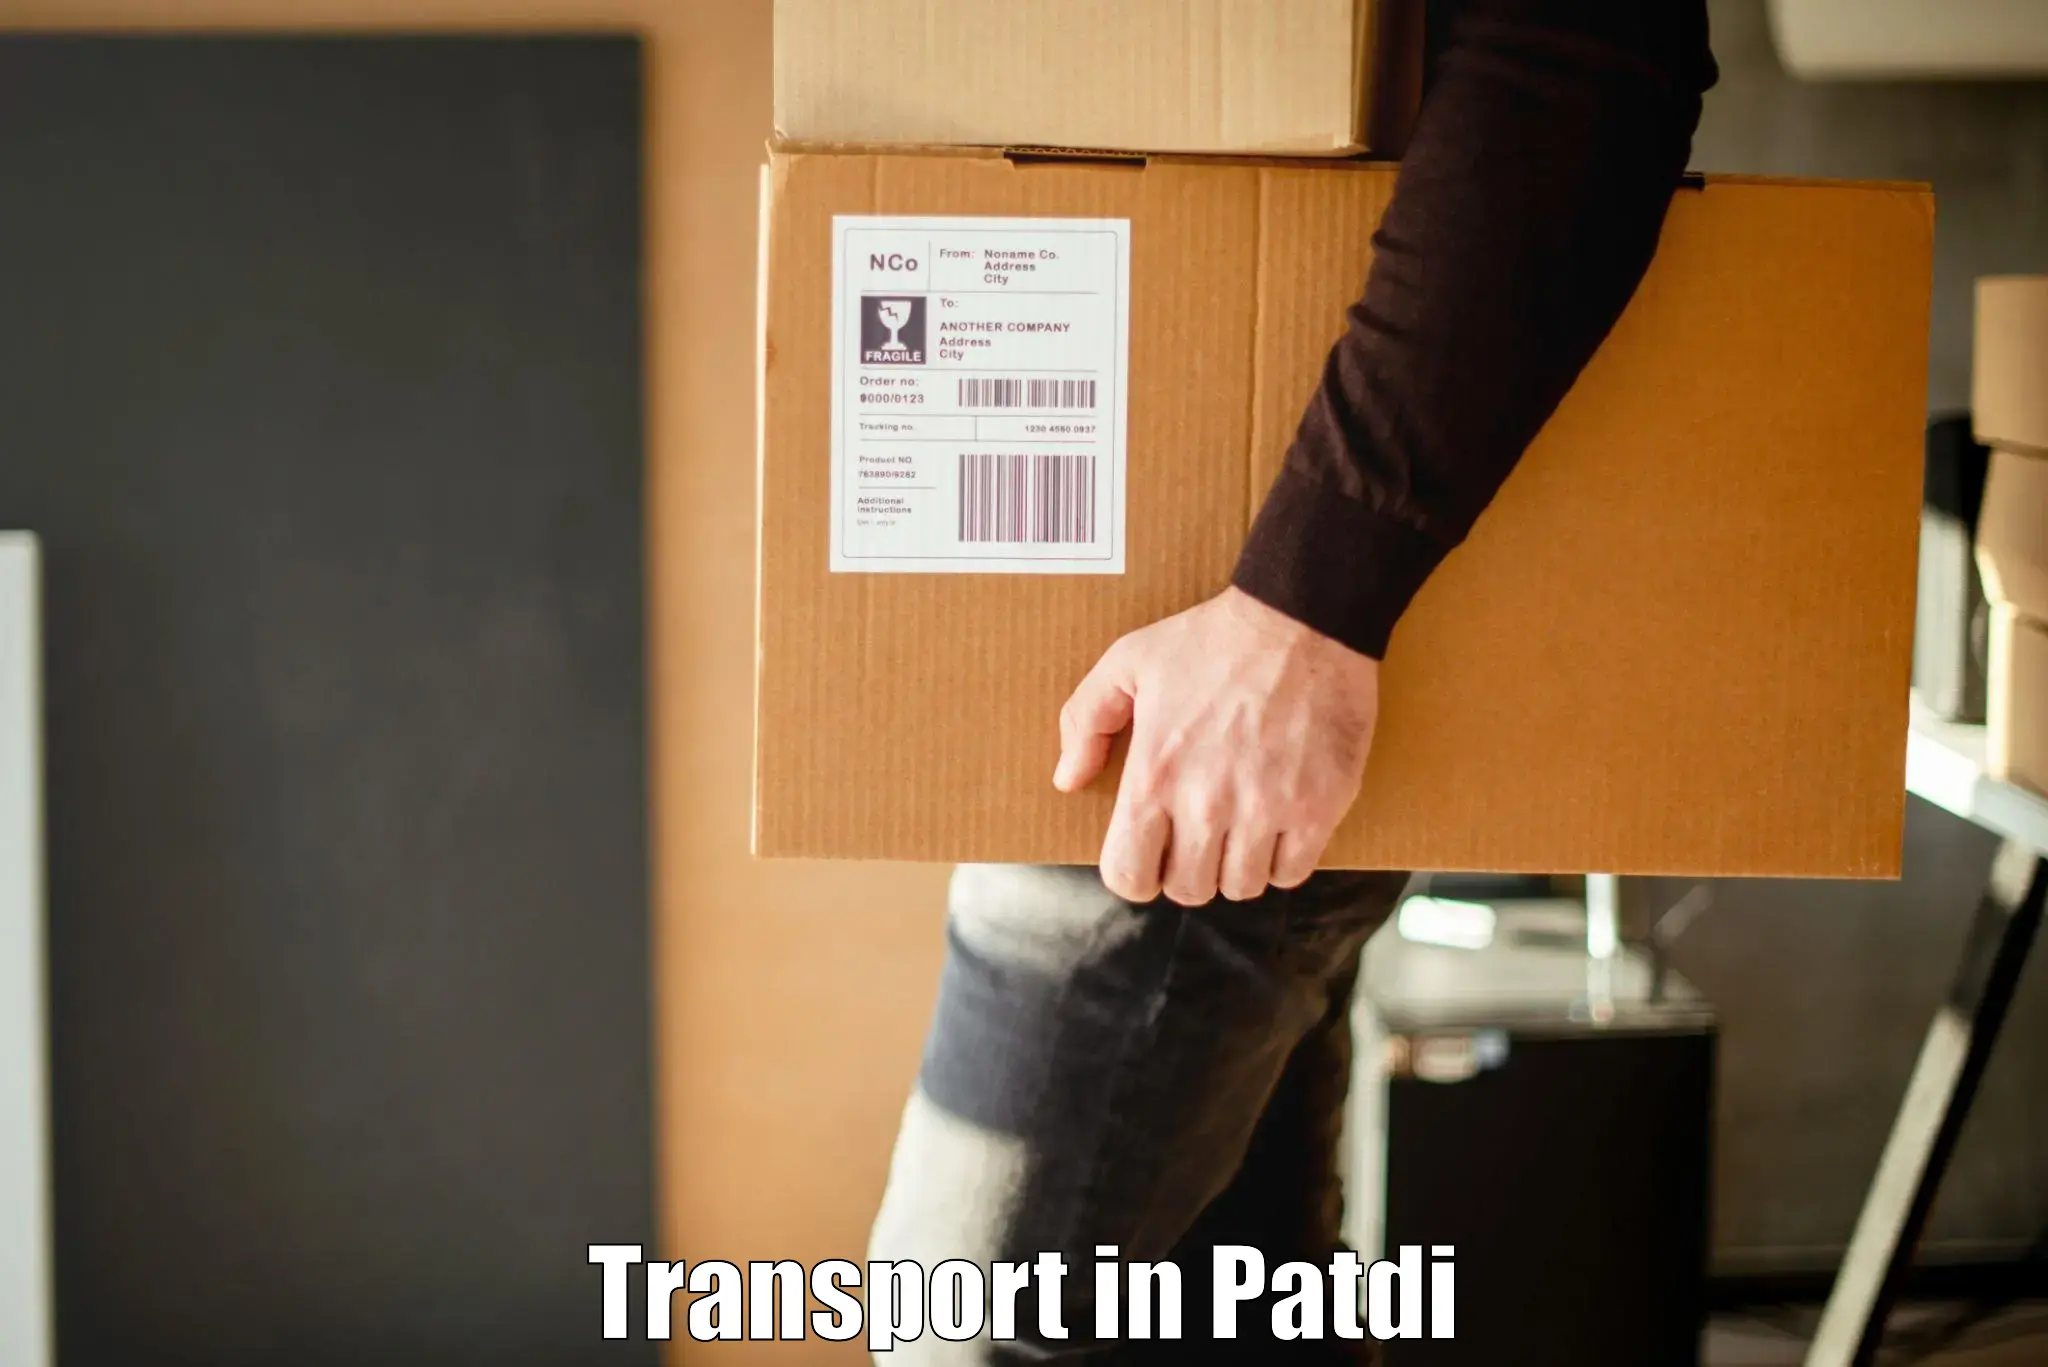 Daily transport service in Patdi